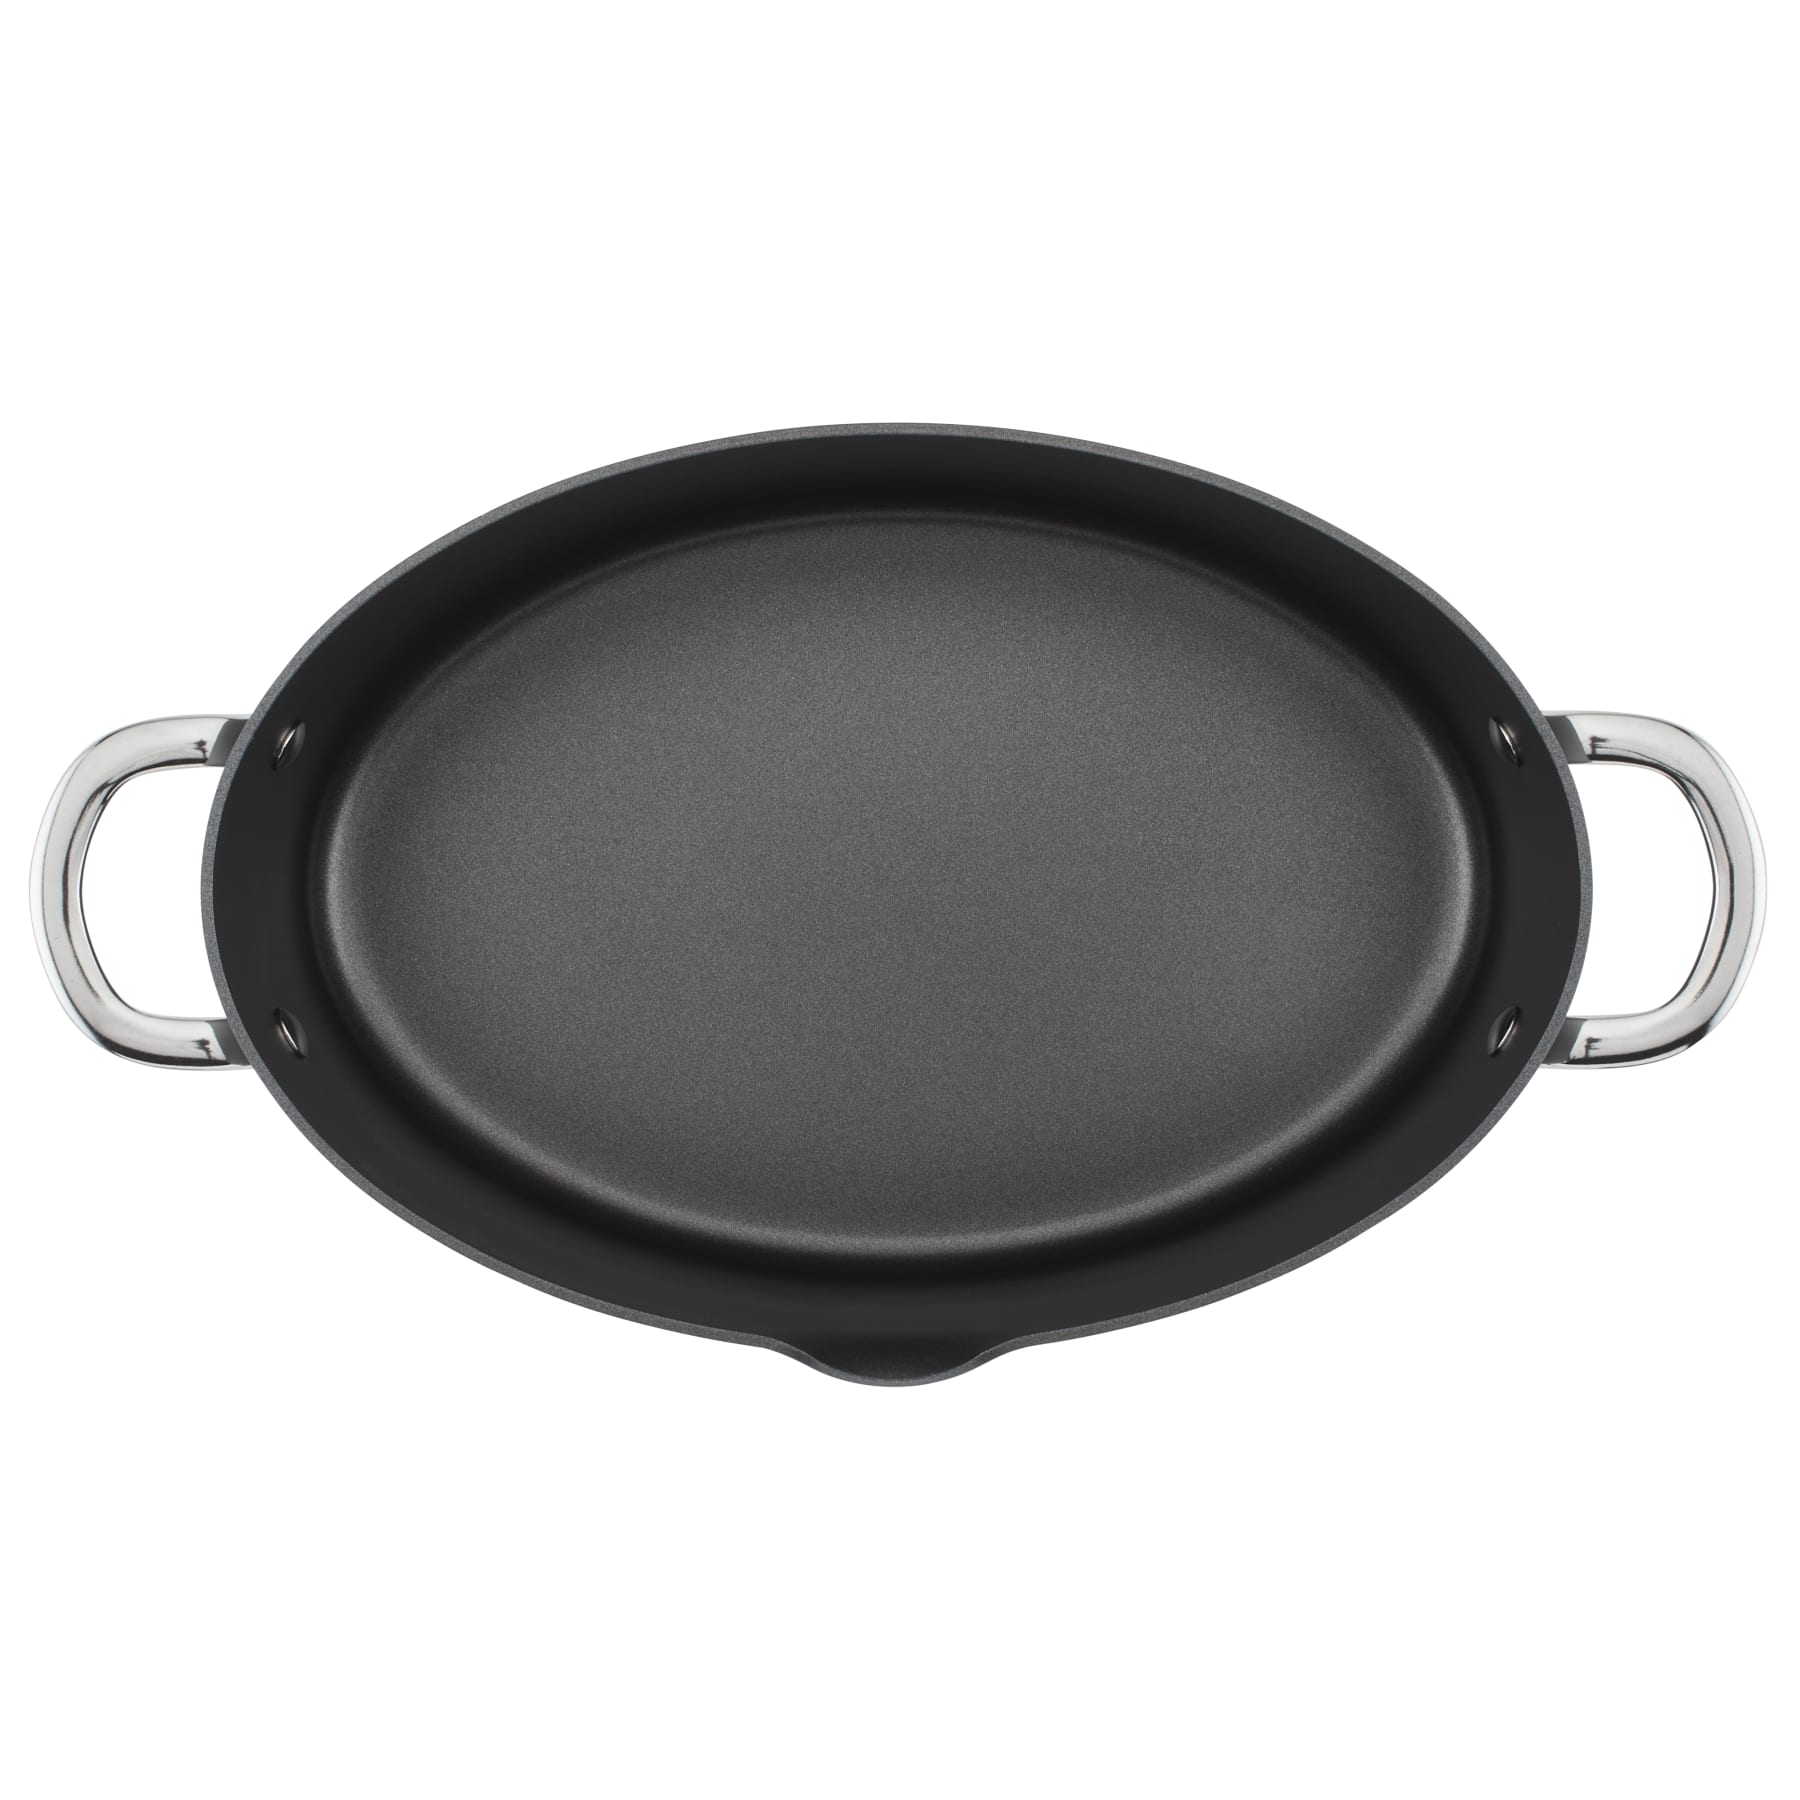 Casserole, frying pan, electric paella pan Bastilipo be 35-1800, power  1800W, large cooking surface: 35